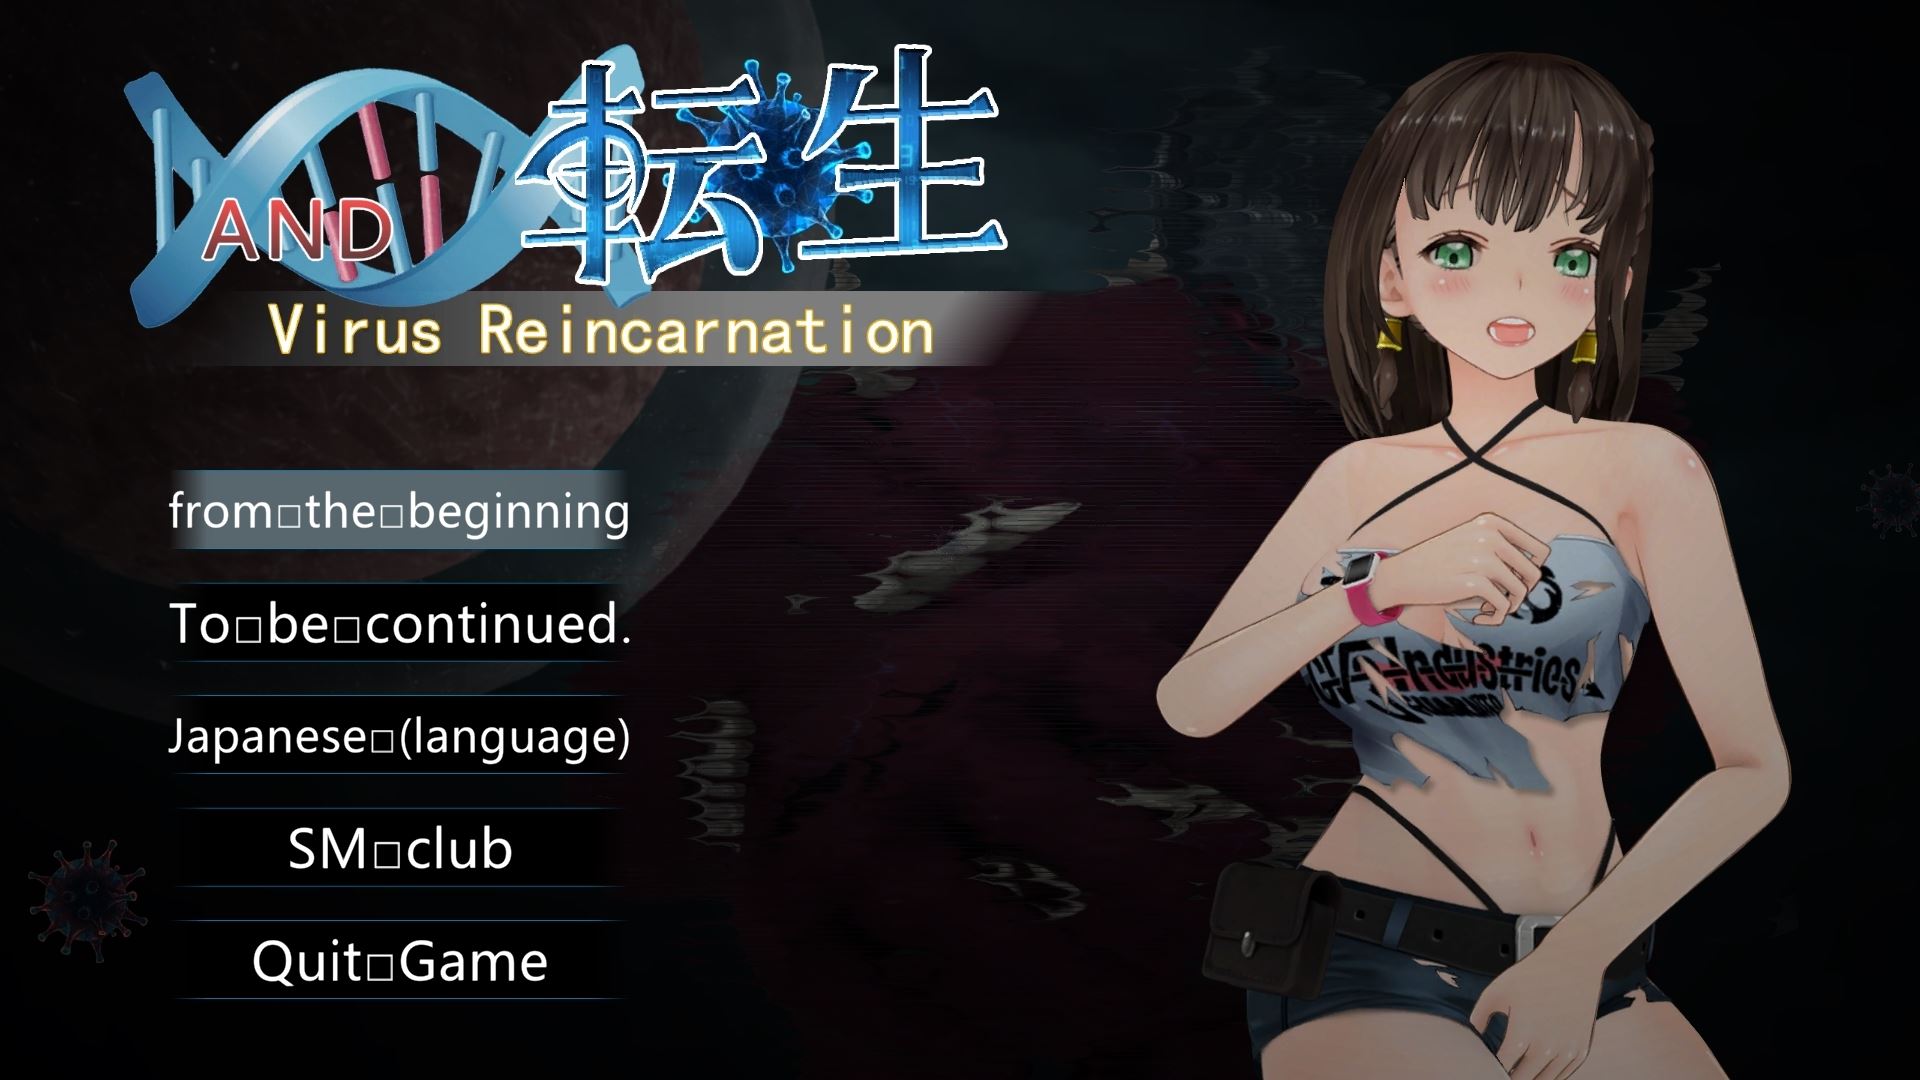 Zombie Sex And Virus Reincarnation Unity Adult Sex Game New Version Vfinal Free Download For 4974